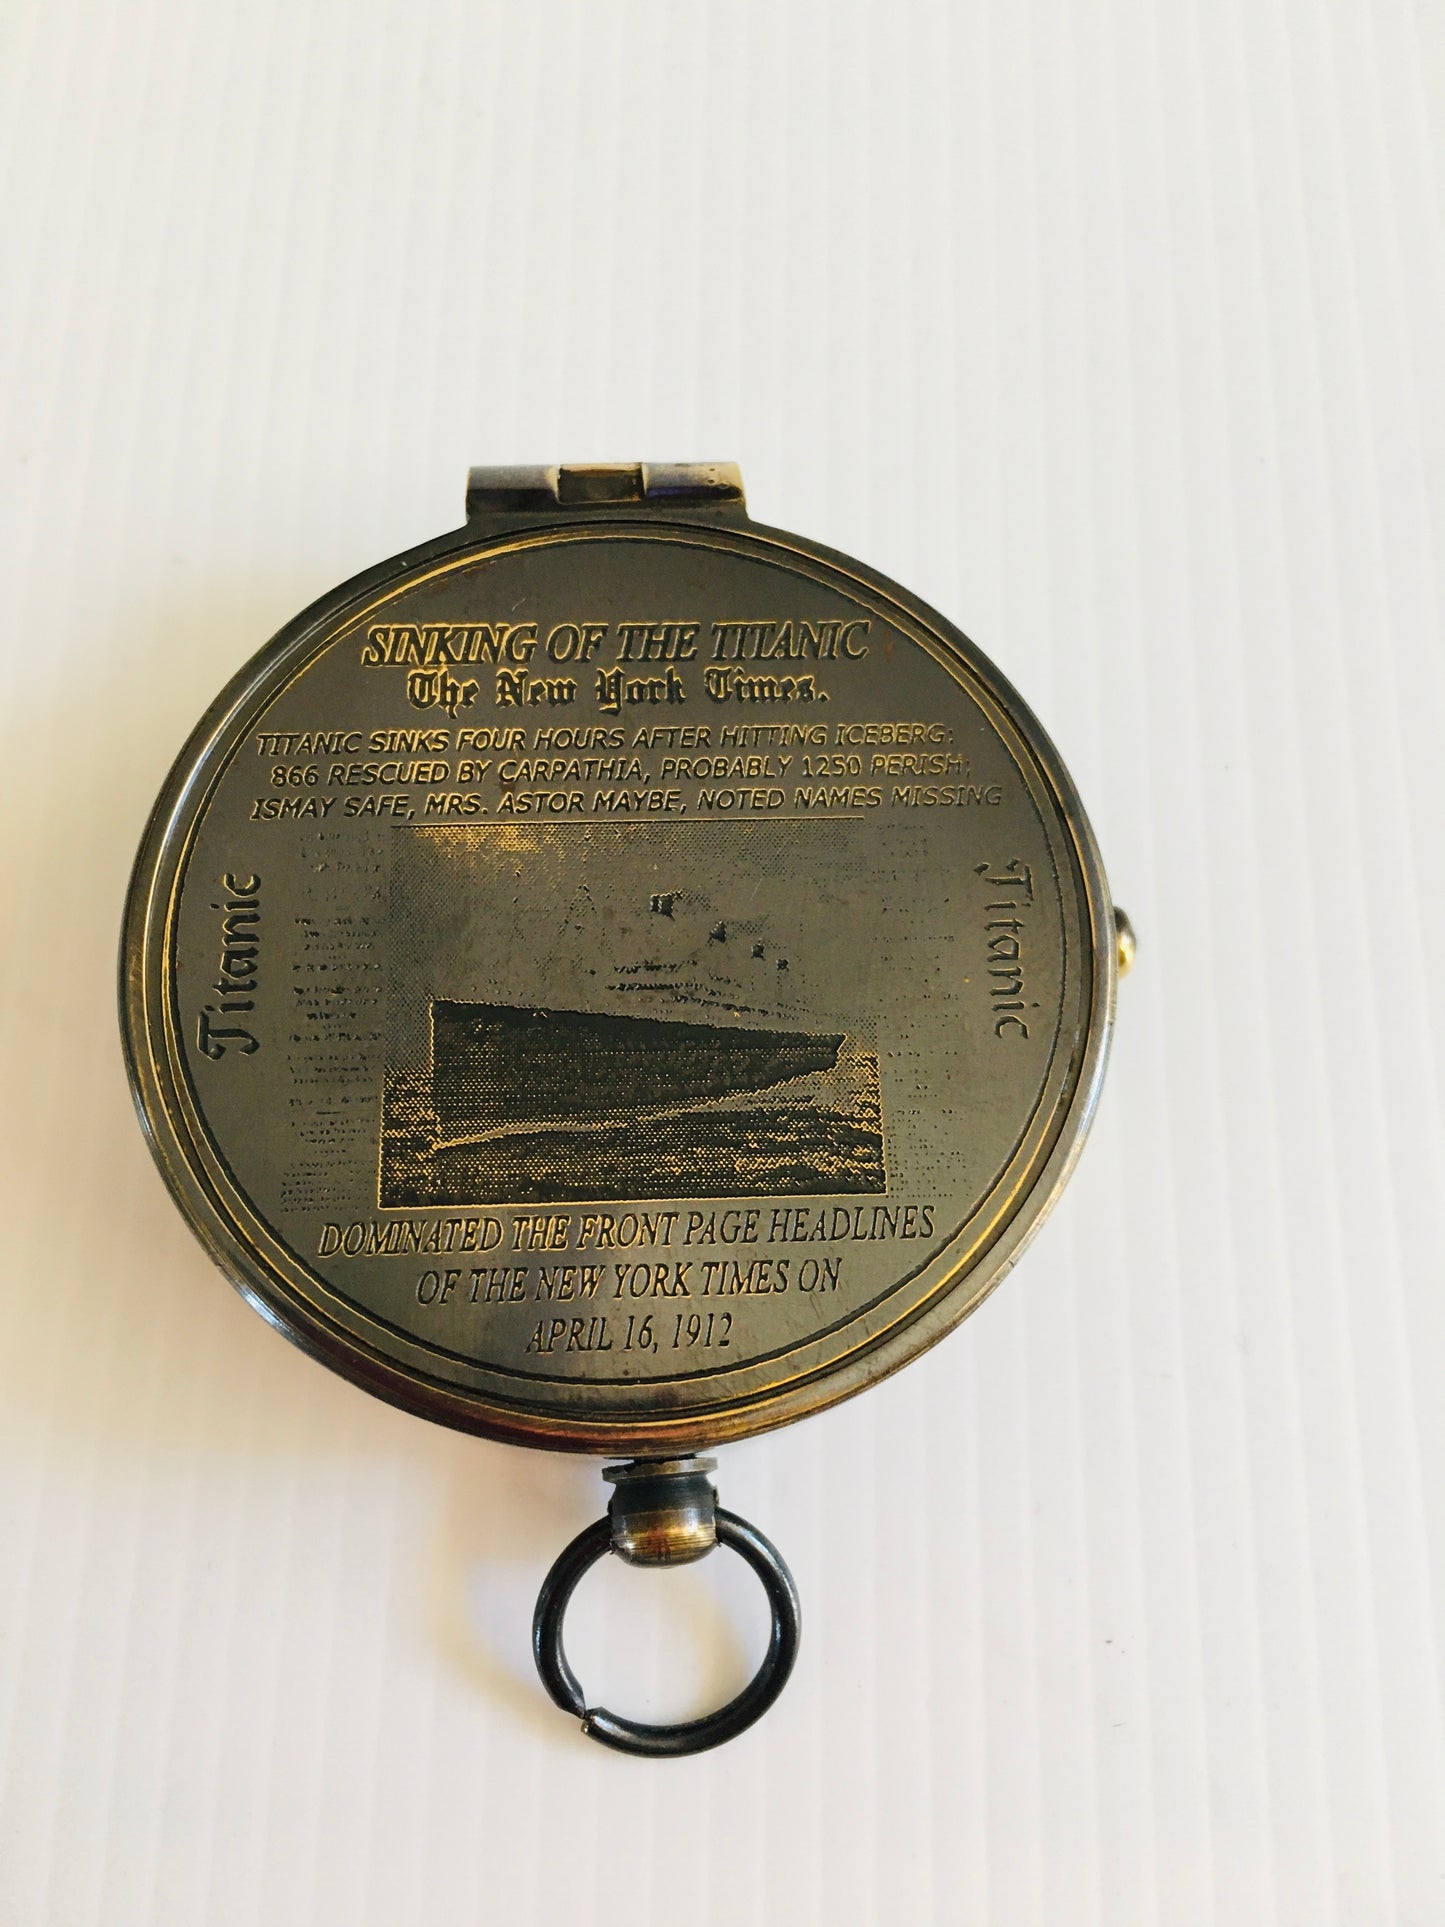 Compass 2 " Solid Brass with flip top lid  Titanic 1912 Remembrance item